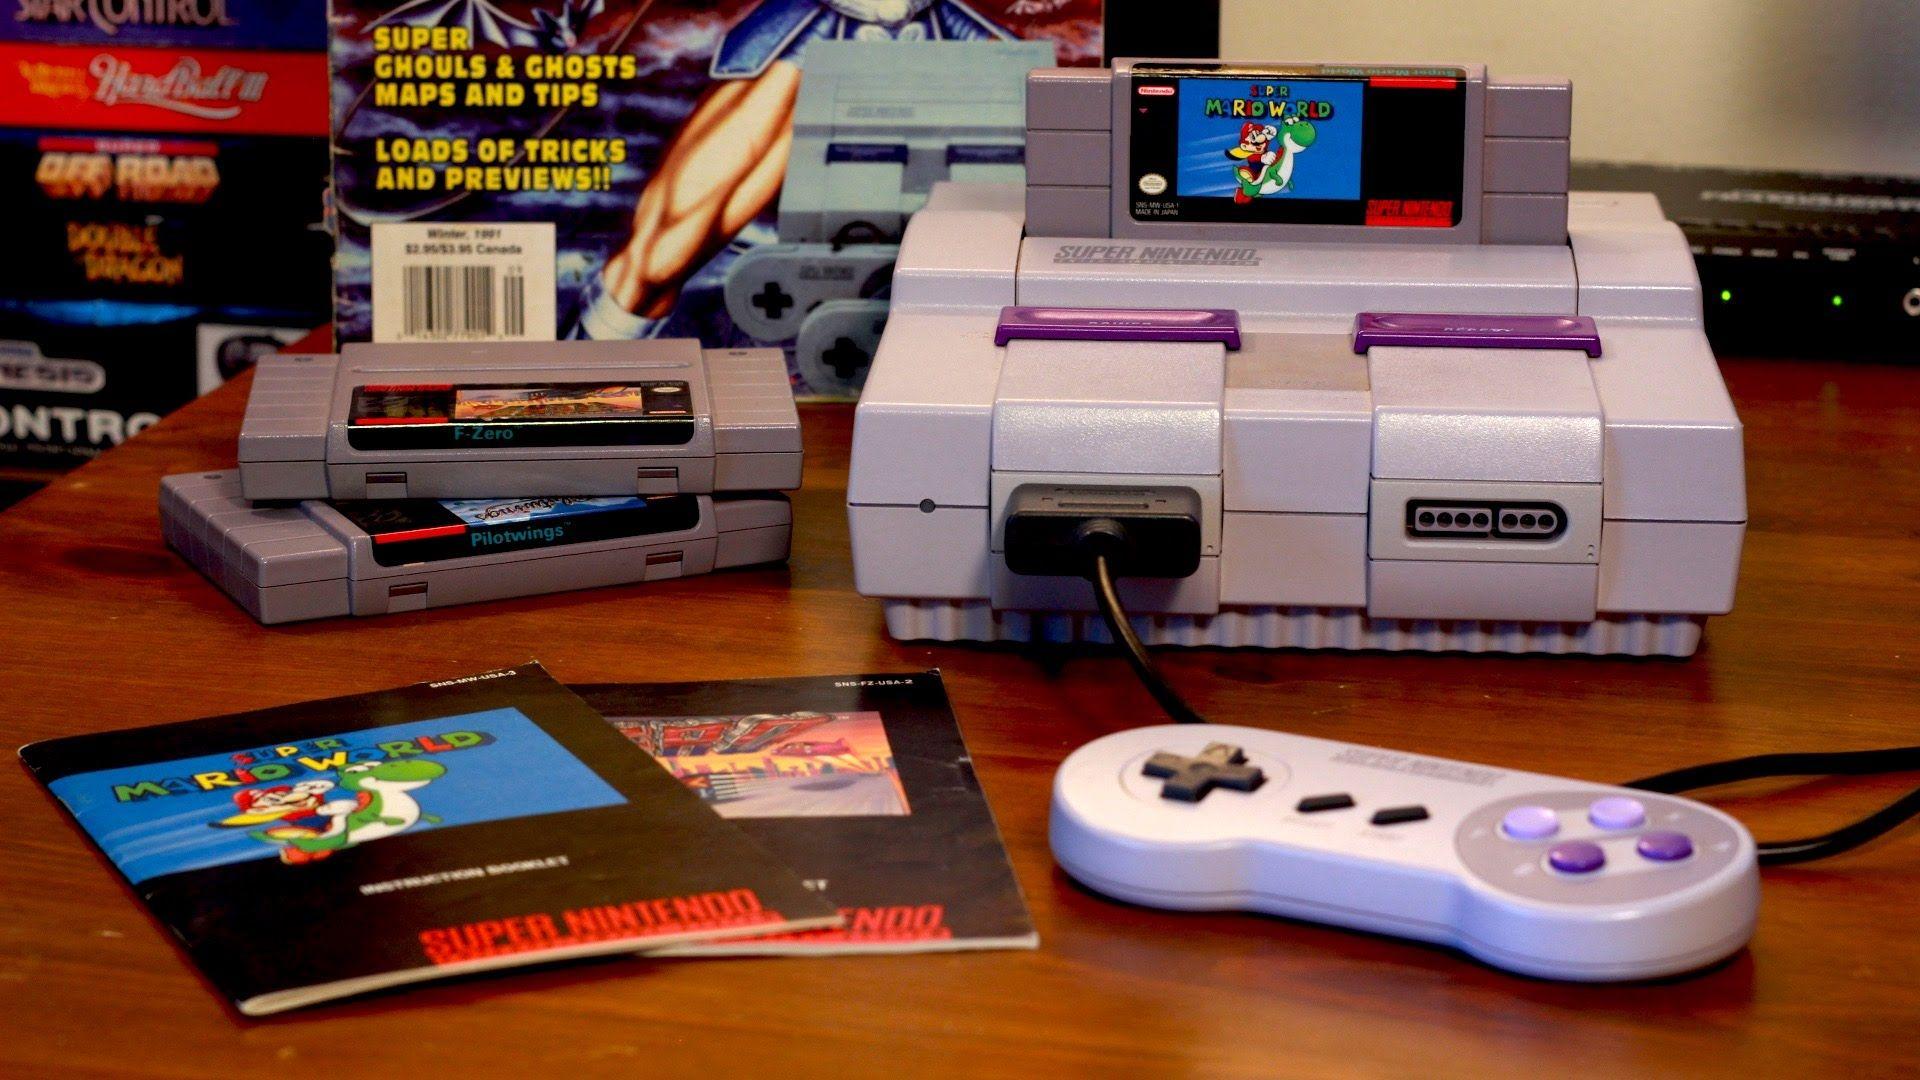 The Super Nintendo almost had banking software?!